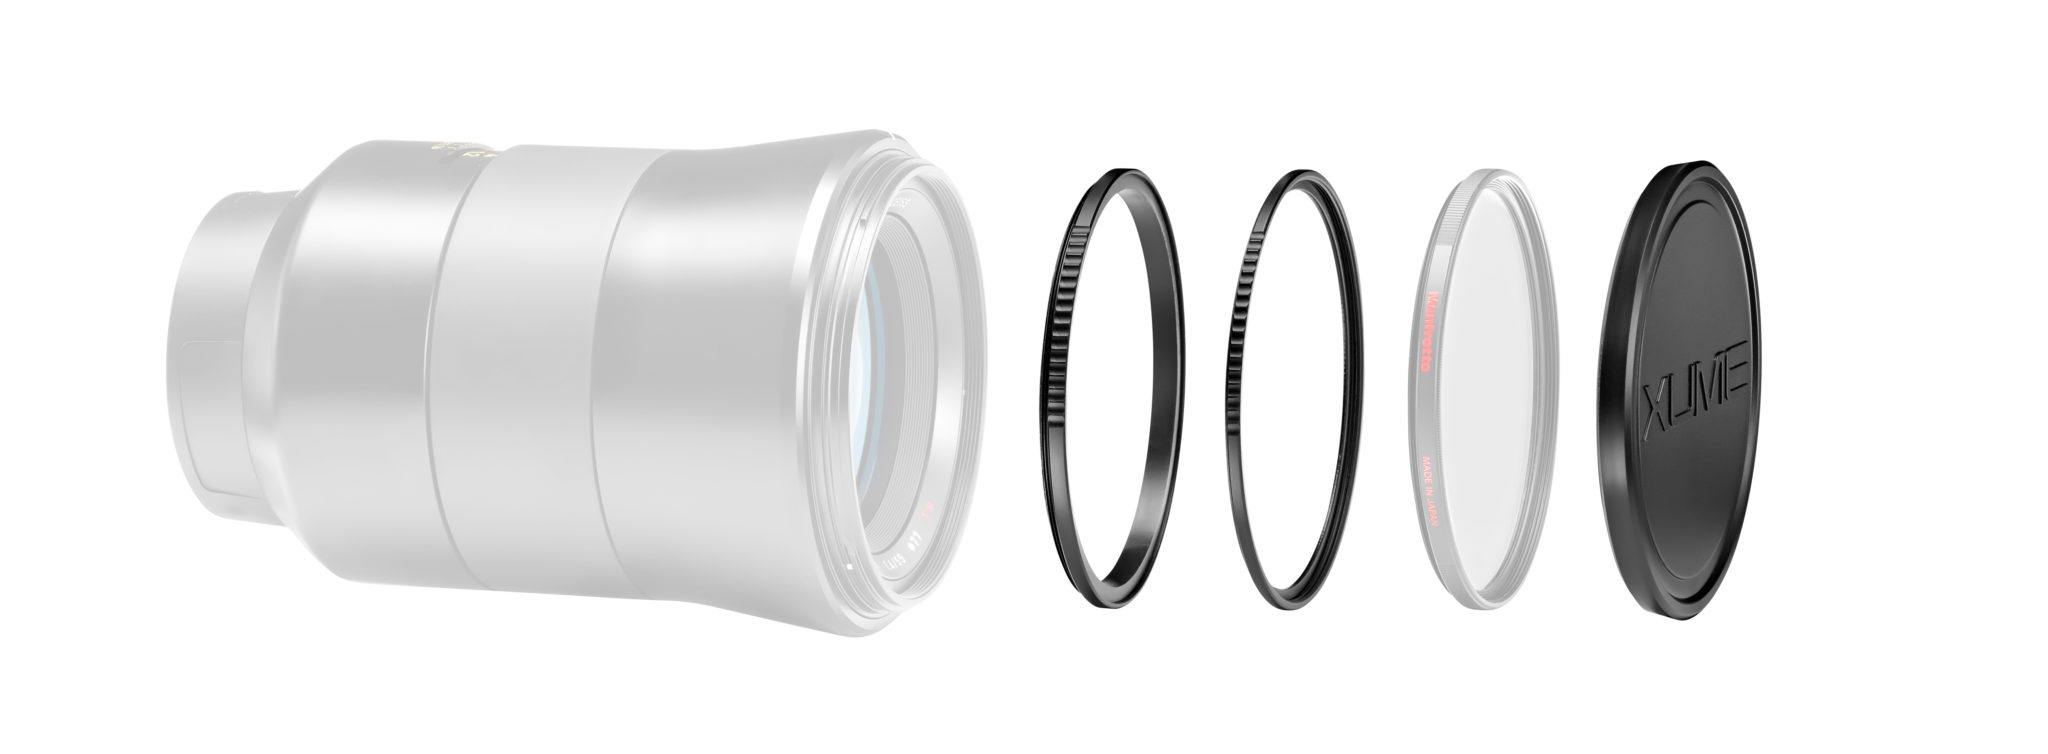 Manfrotto Announces New Lens Filter Suite at WPPI